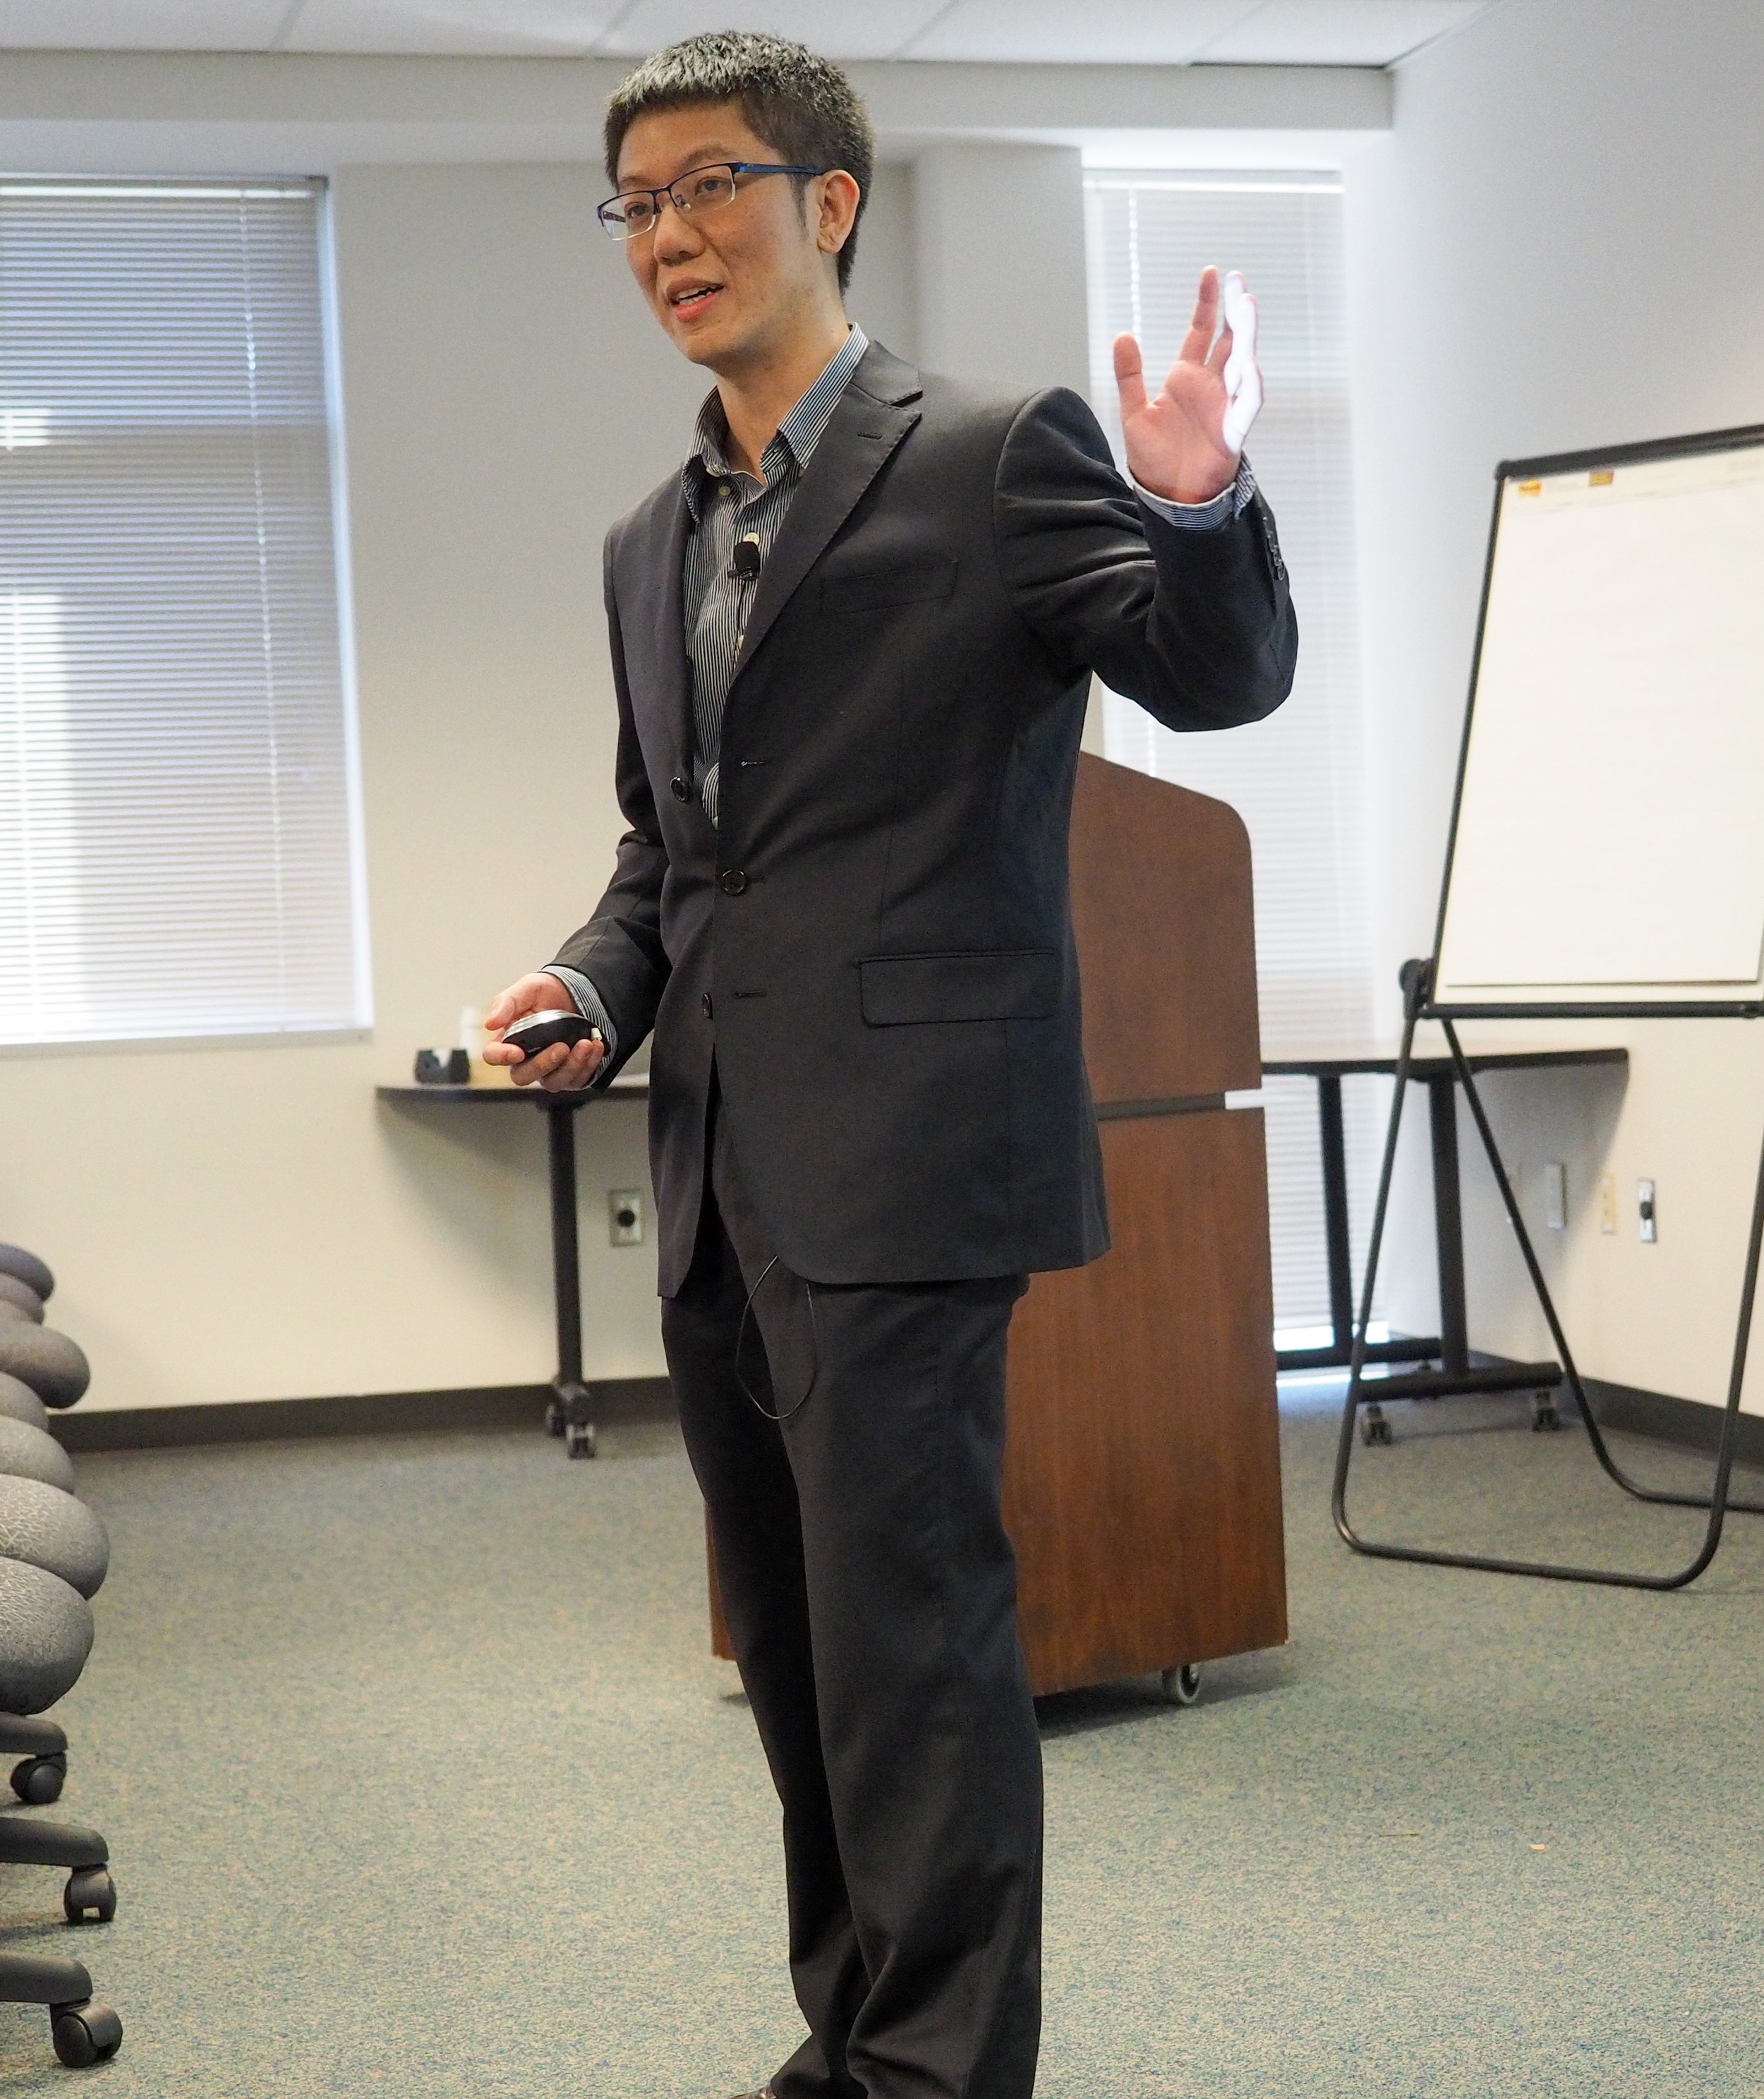 Hao Cai (UNC), winner of the travel award, shares his research about cation-selective transporters.